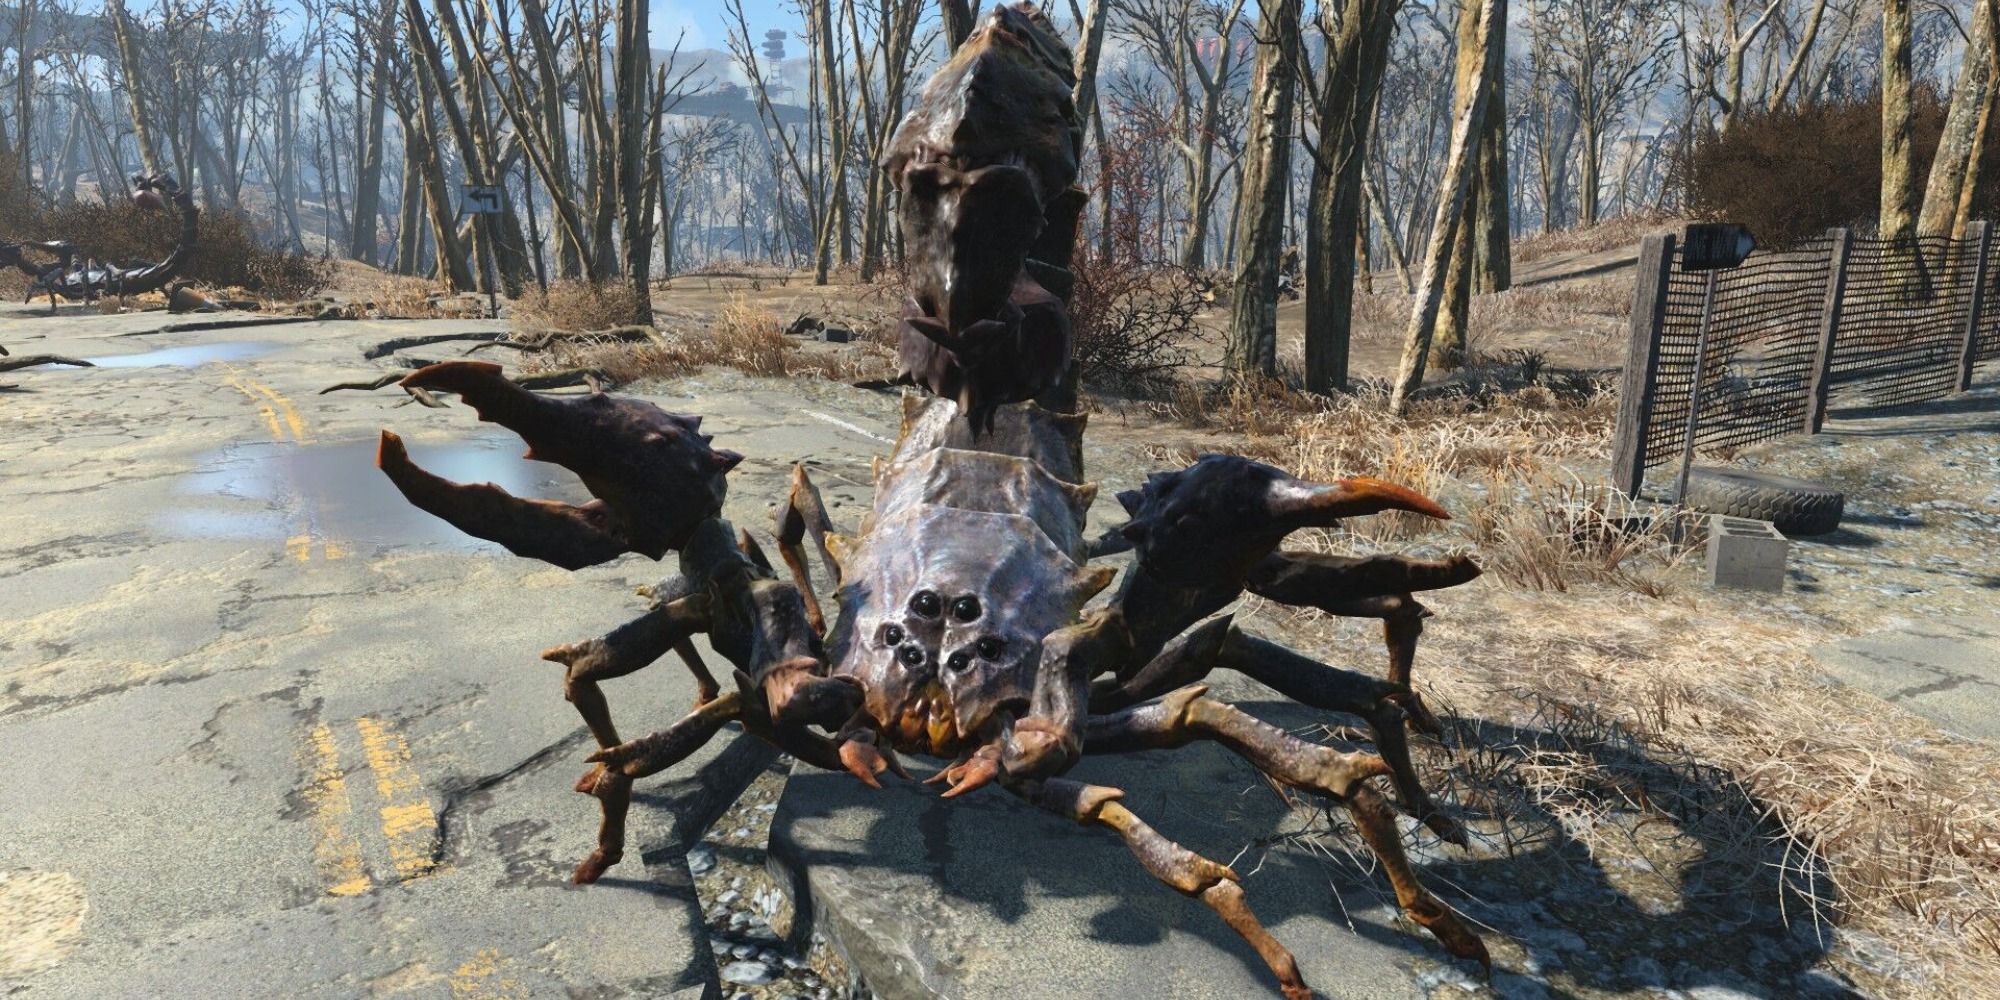 Radscorpion in middle of road staring at camera